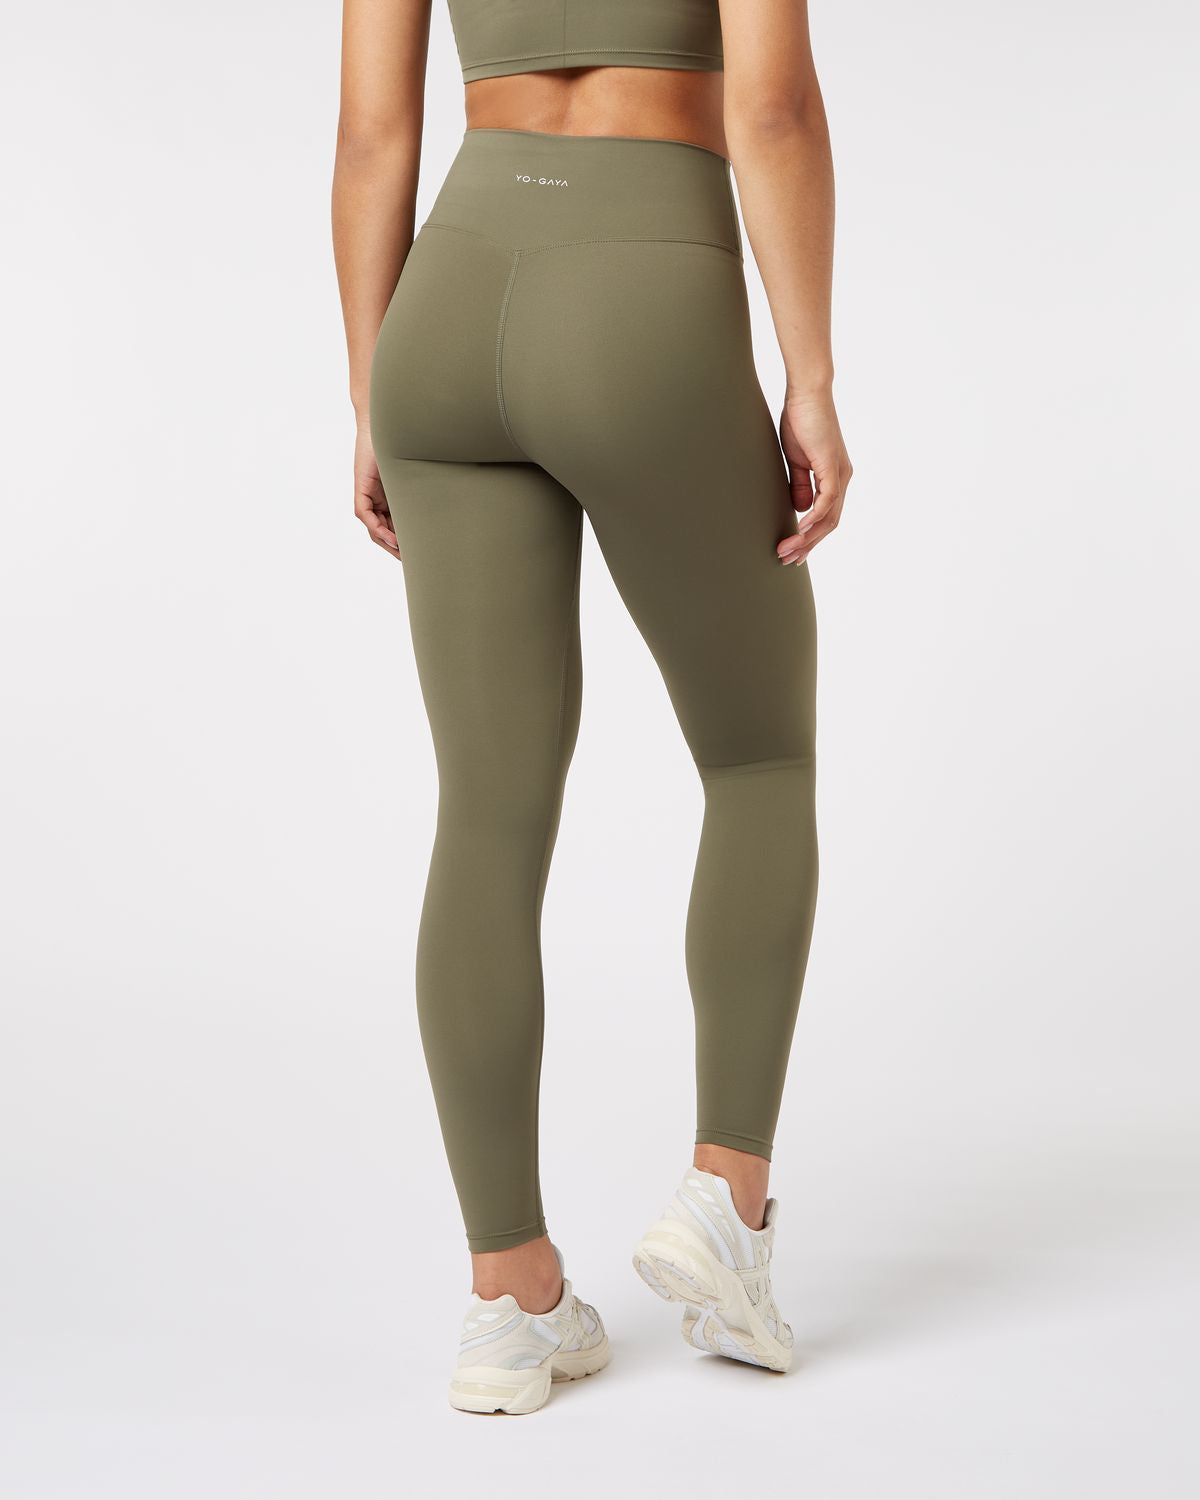 YHWW Leggings,Female Leggings Yoga Pants Close-Fitting Sportswear Running  Tights Good Elasticity and Soft S BambooGreen : : Clothing, Shoes  & Accessories